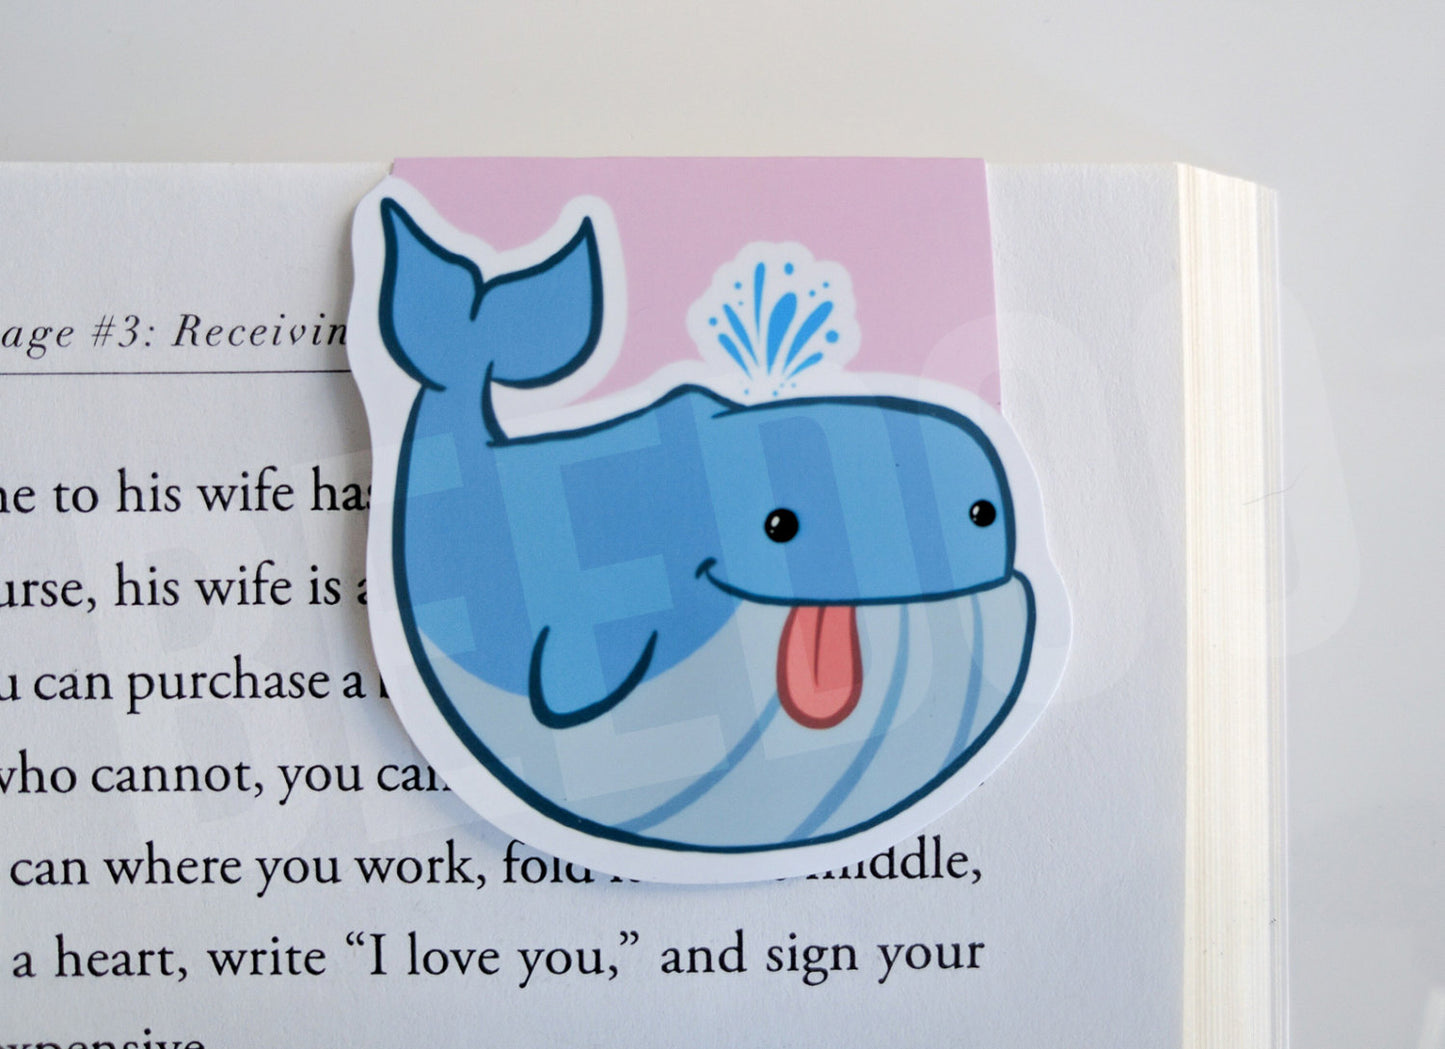 Blue Whale Magnetic Bookmark